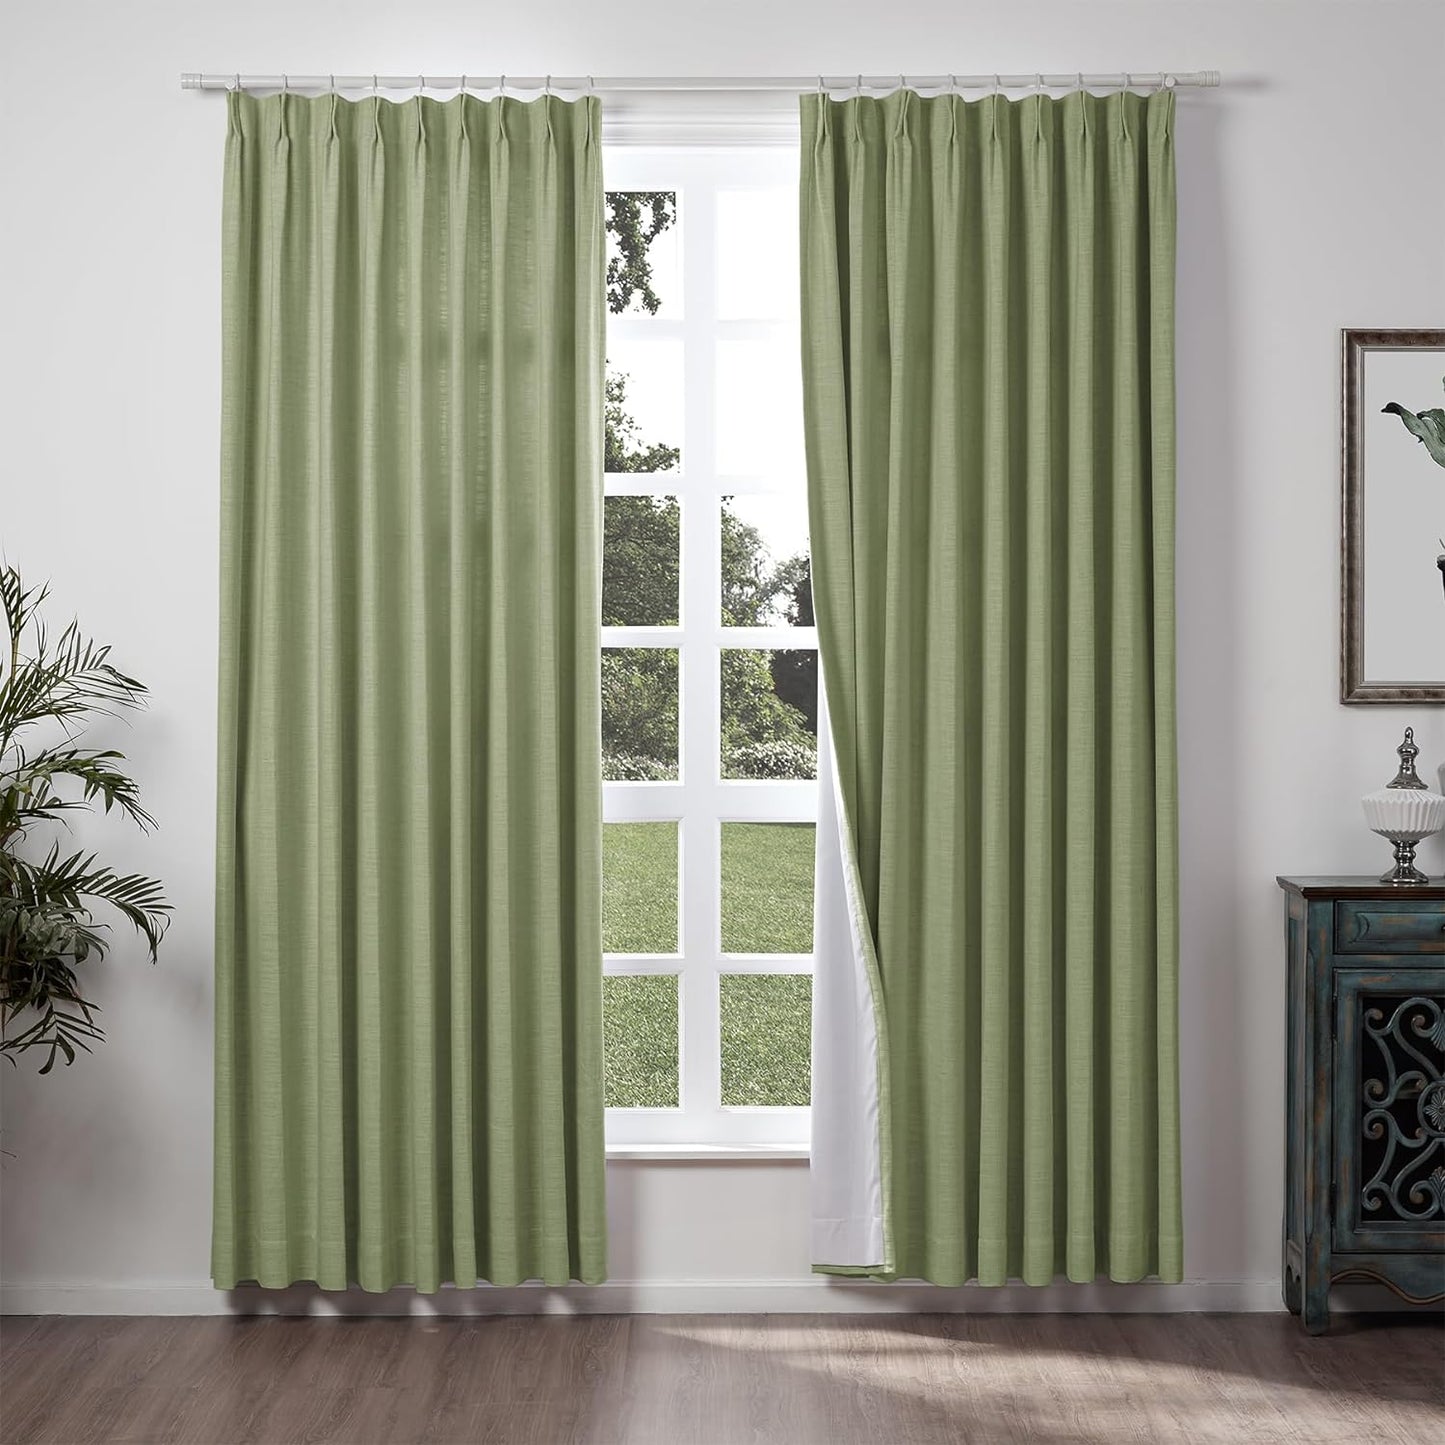 Chadmade 50" W X 63" L Polyester Linen Drape with Blackout Lining Pinch Pleat Curtain for Sliding Door Patio Door Living Room Bedroom, (1 Panel) Sand Beige Tallis Collection  ChadMade Jade Green (29) 100Wx84L 